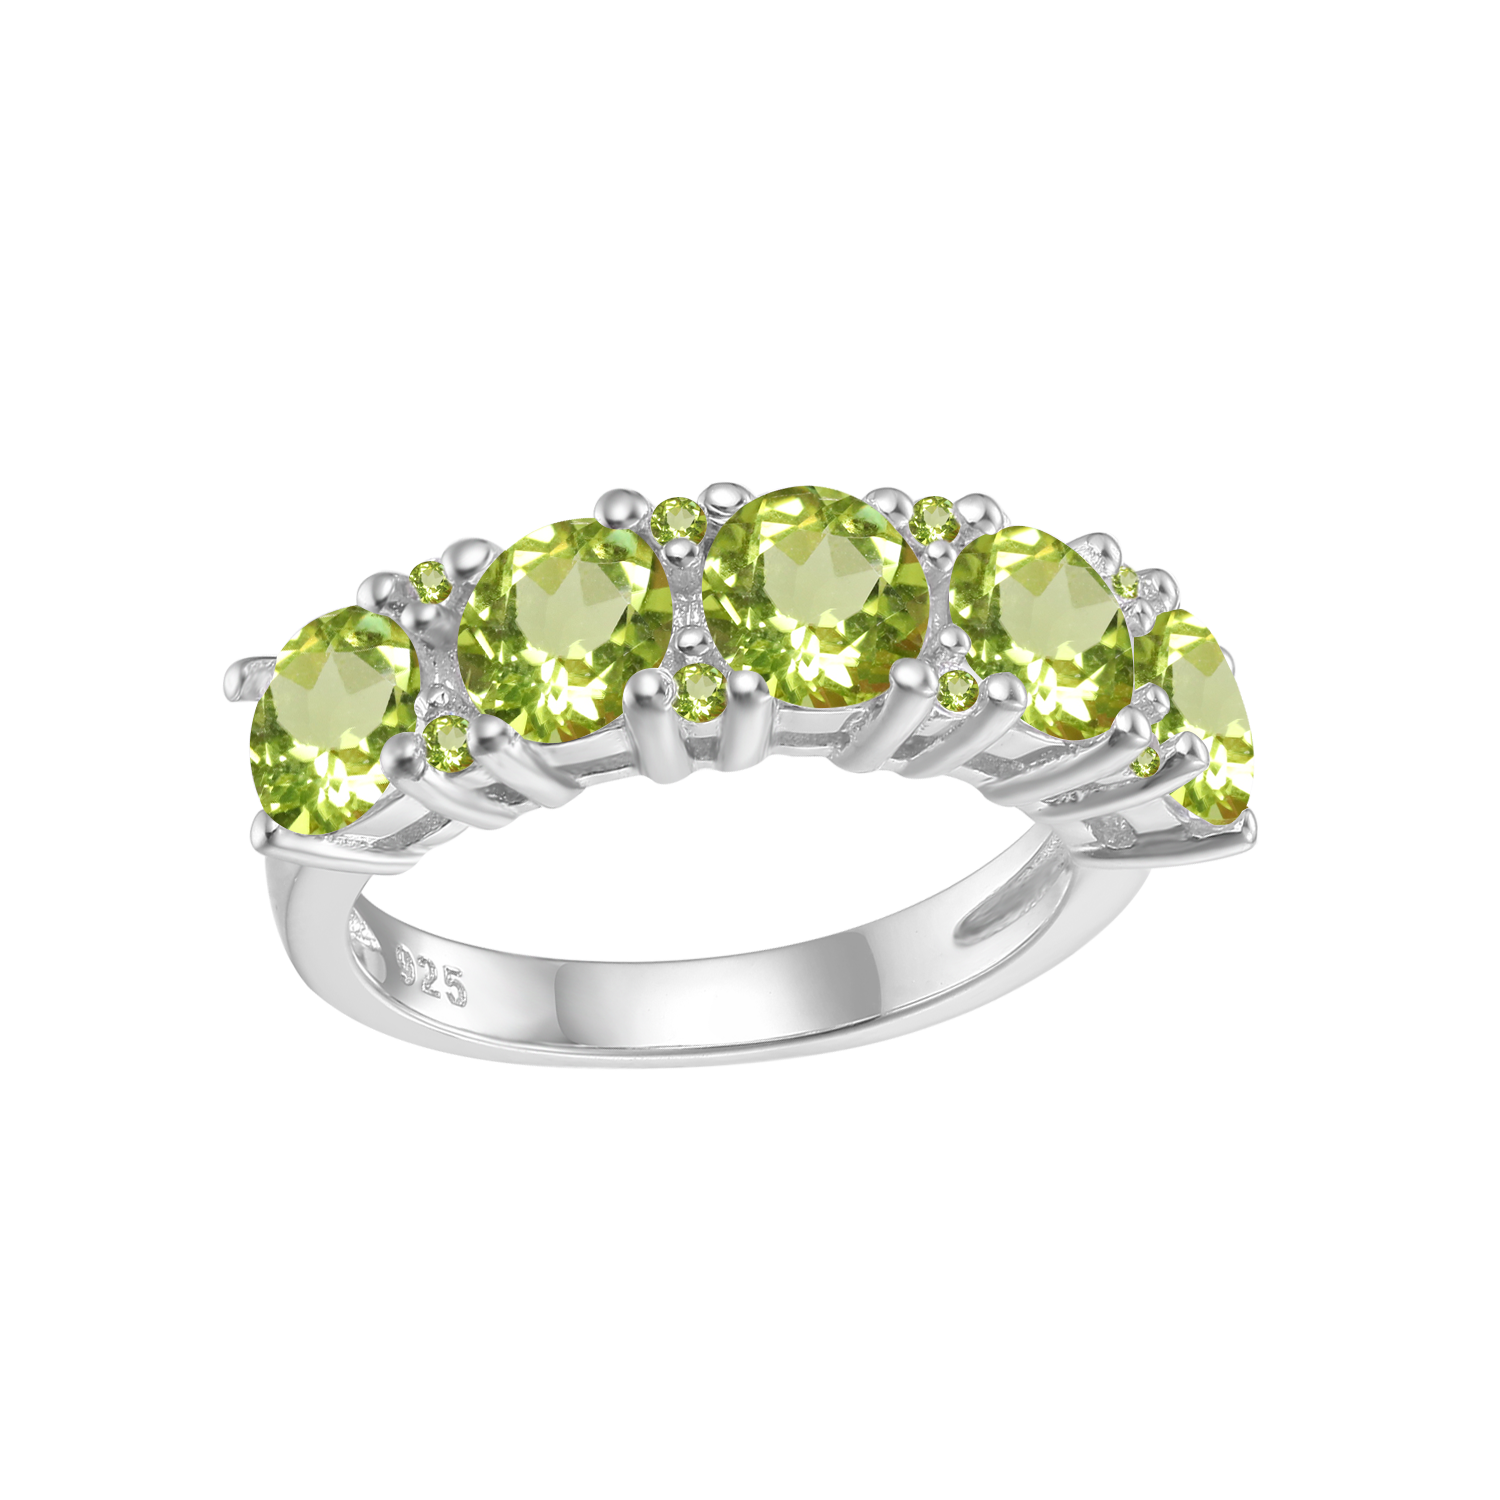 A silver ring set with five light green gems.